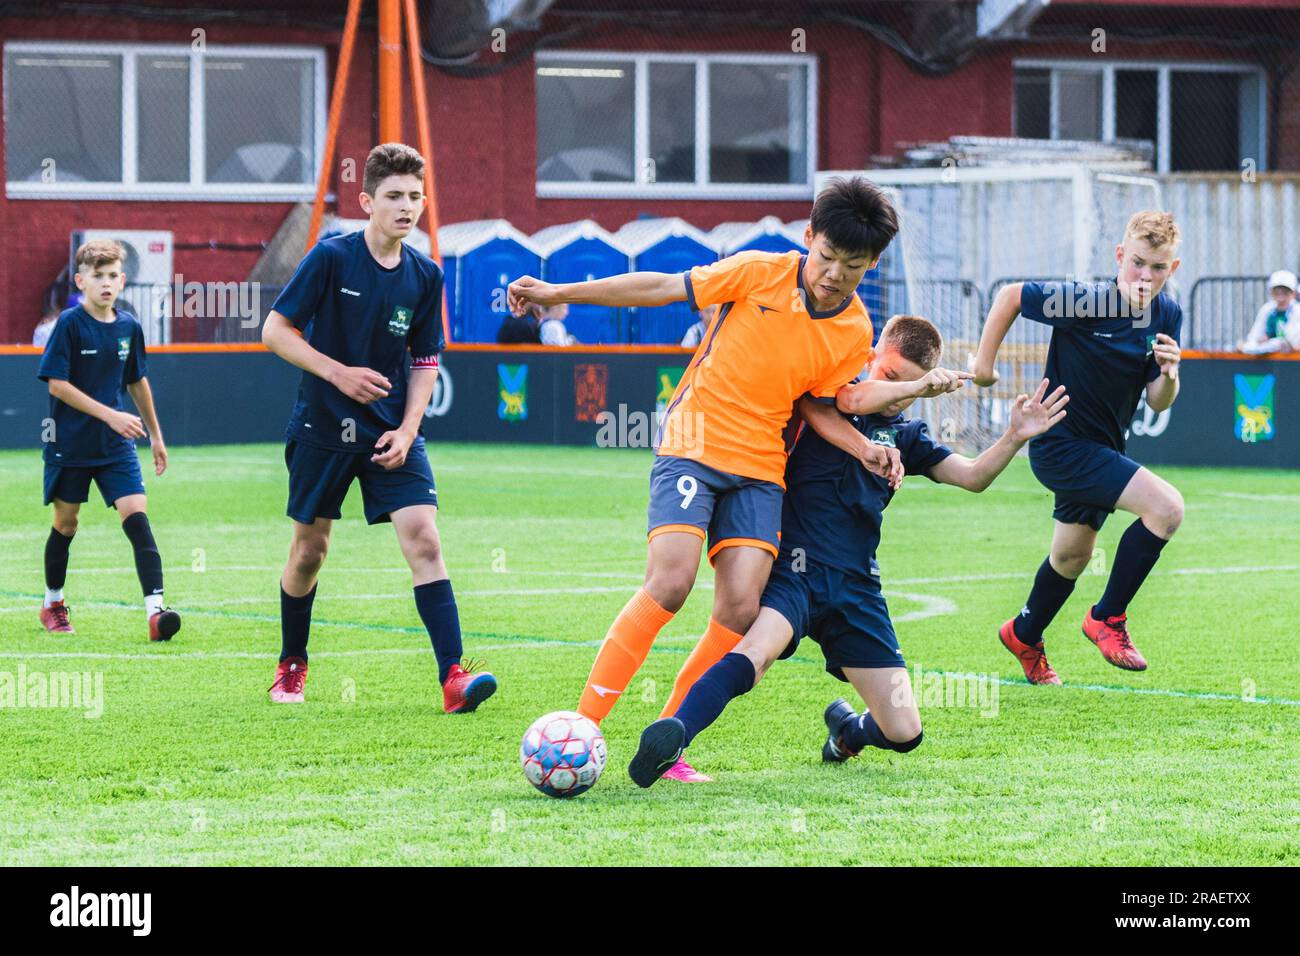 Vladivostok, Russia. 3rd July, 2023. Qiao Guanyu (front L) of Hunchun Youth Team of China competes during the men's five-a-side football match between Hunchun Youth Team of China and Yakovlevsky District Team of Russia at the Children of Primorye International Sports Games in Vladivostok, Russia, July 3, 2023. Credit: Guo Feizhou/Xinhua/Alamy Live News Stock Photo